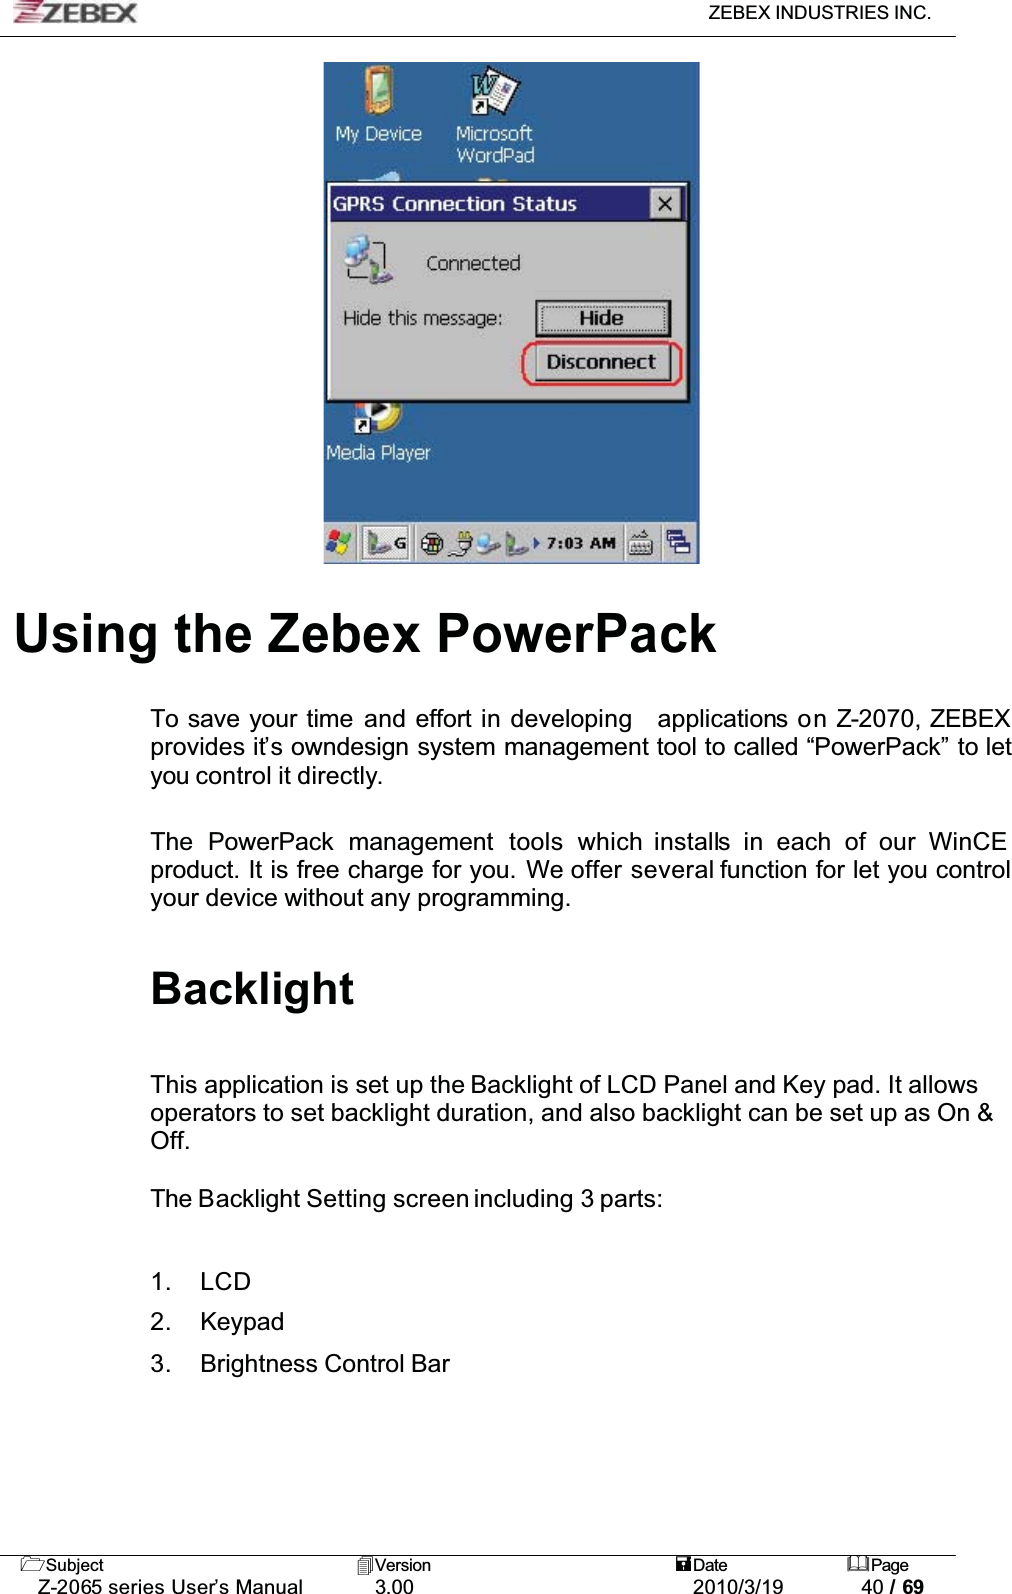 ZEBEX INDUSTRIES INC. Subject Version Date PageZ-2065 series User’s Manual 3.00 2010/3/19 40 / 69Using the Zebex PowerPackTo save your time and effort in developing applications on Z-2070, ZEBEX provides it’s owndesign system management tool to called “PowerPack” to let you control it directly.The PowerPack management tools which installs in each of our WinCE product. It is free charge for you. We offer several function for let you control your device without any programming.BacklightThis application is set up the Backlight of LCD Panel and Key pad. It allows operators to set backlight duration, and also backlight can be set up as On &amp; Off.The Backlight Setting screen including 3 parts:1. LCD2. Keypad3. Brightness Control Bar